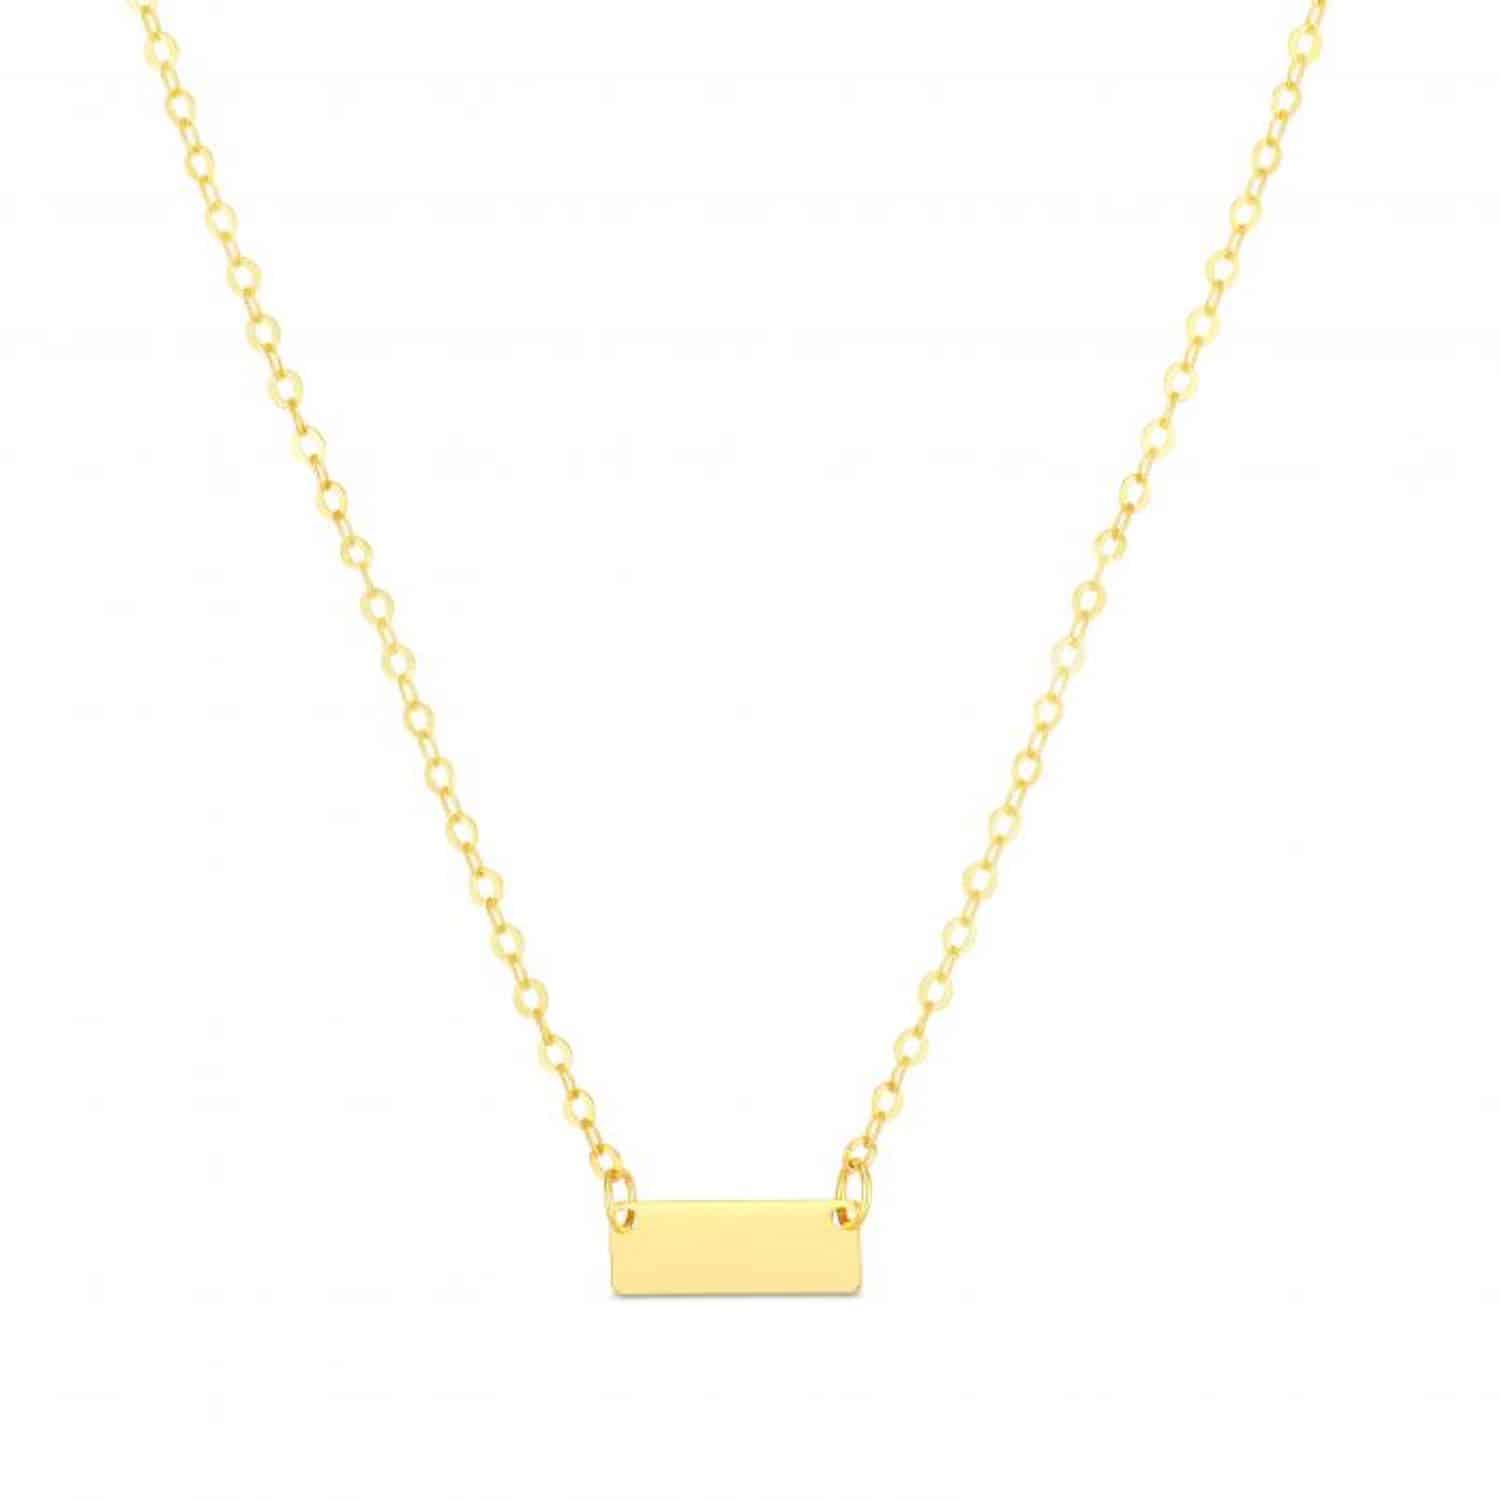 Engravable 14K Gold Yellow White Personalized Bar Pendant Necklace 16"-18" Adjus - Yellow Gold